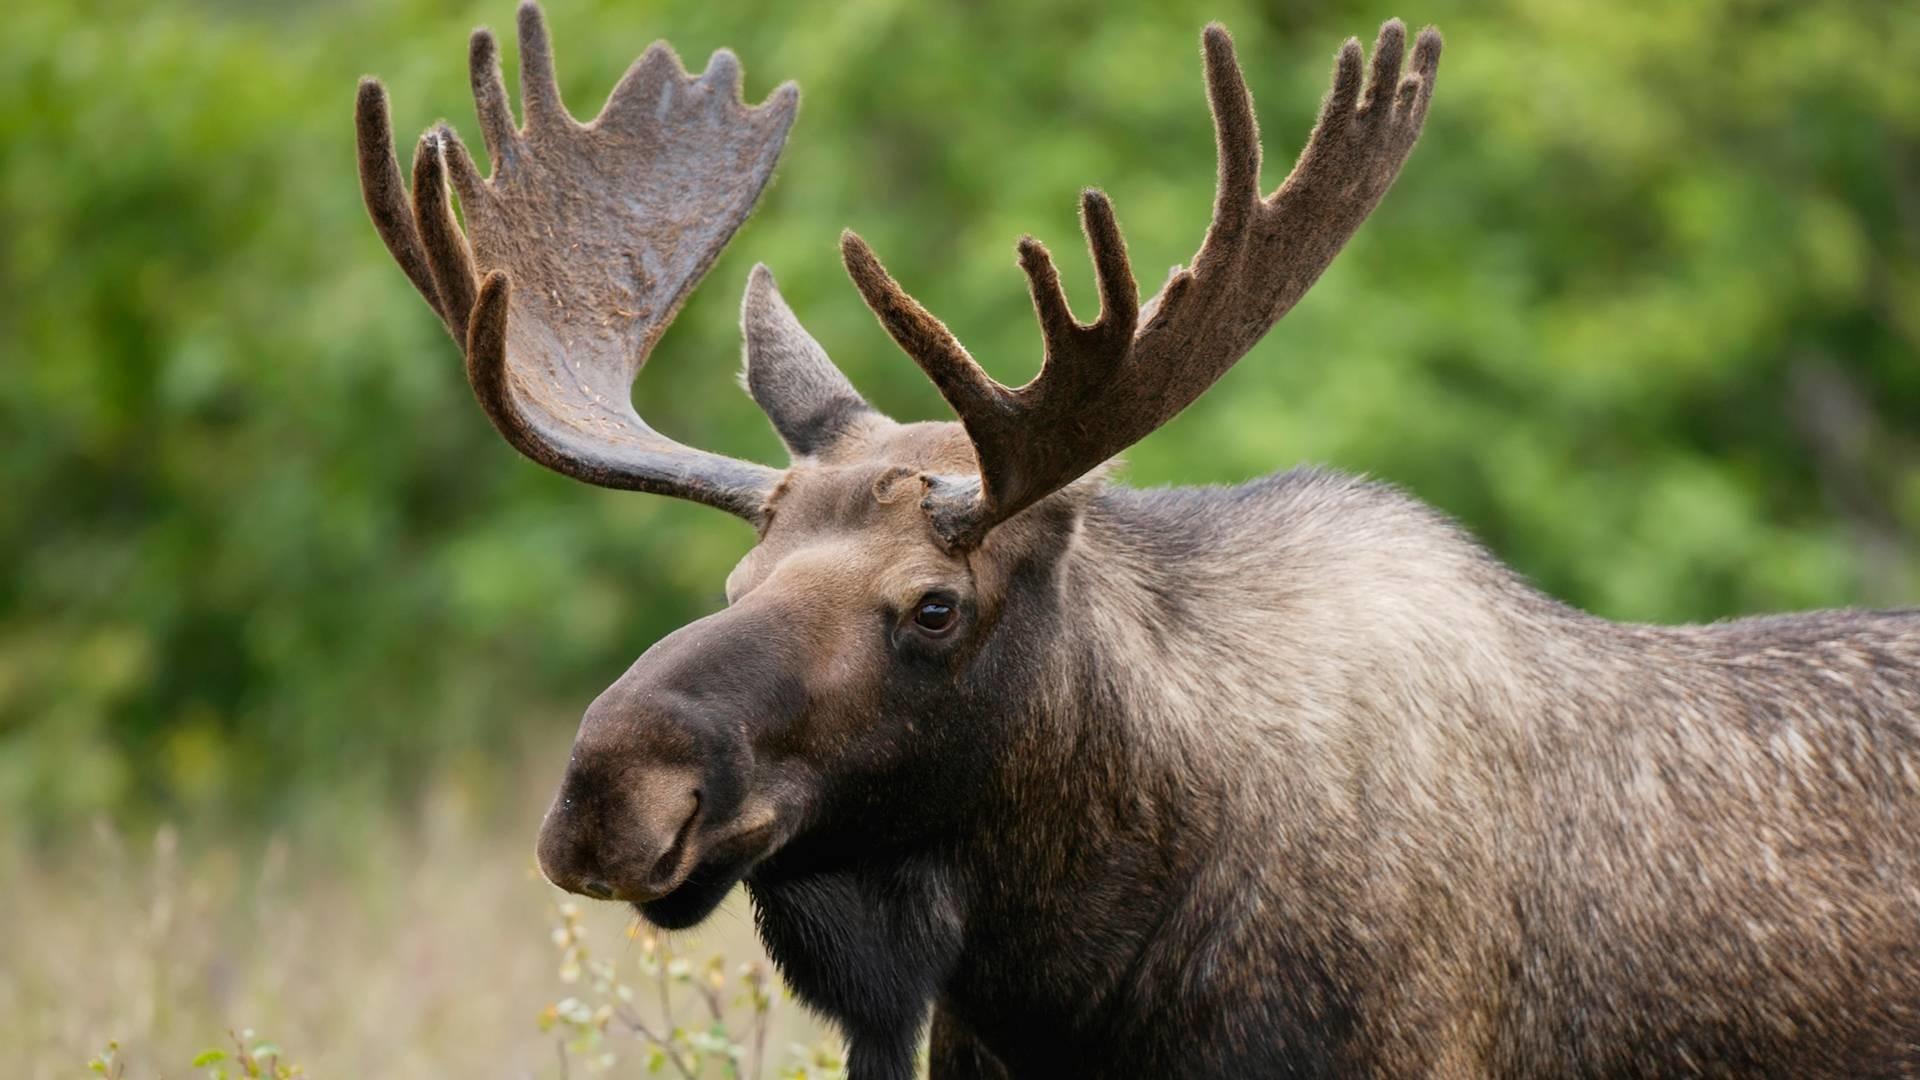 Moose Wallpaper background picture